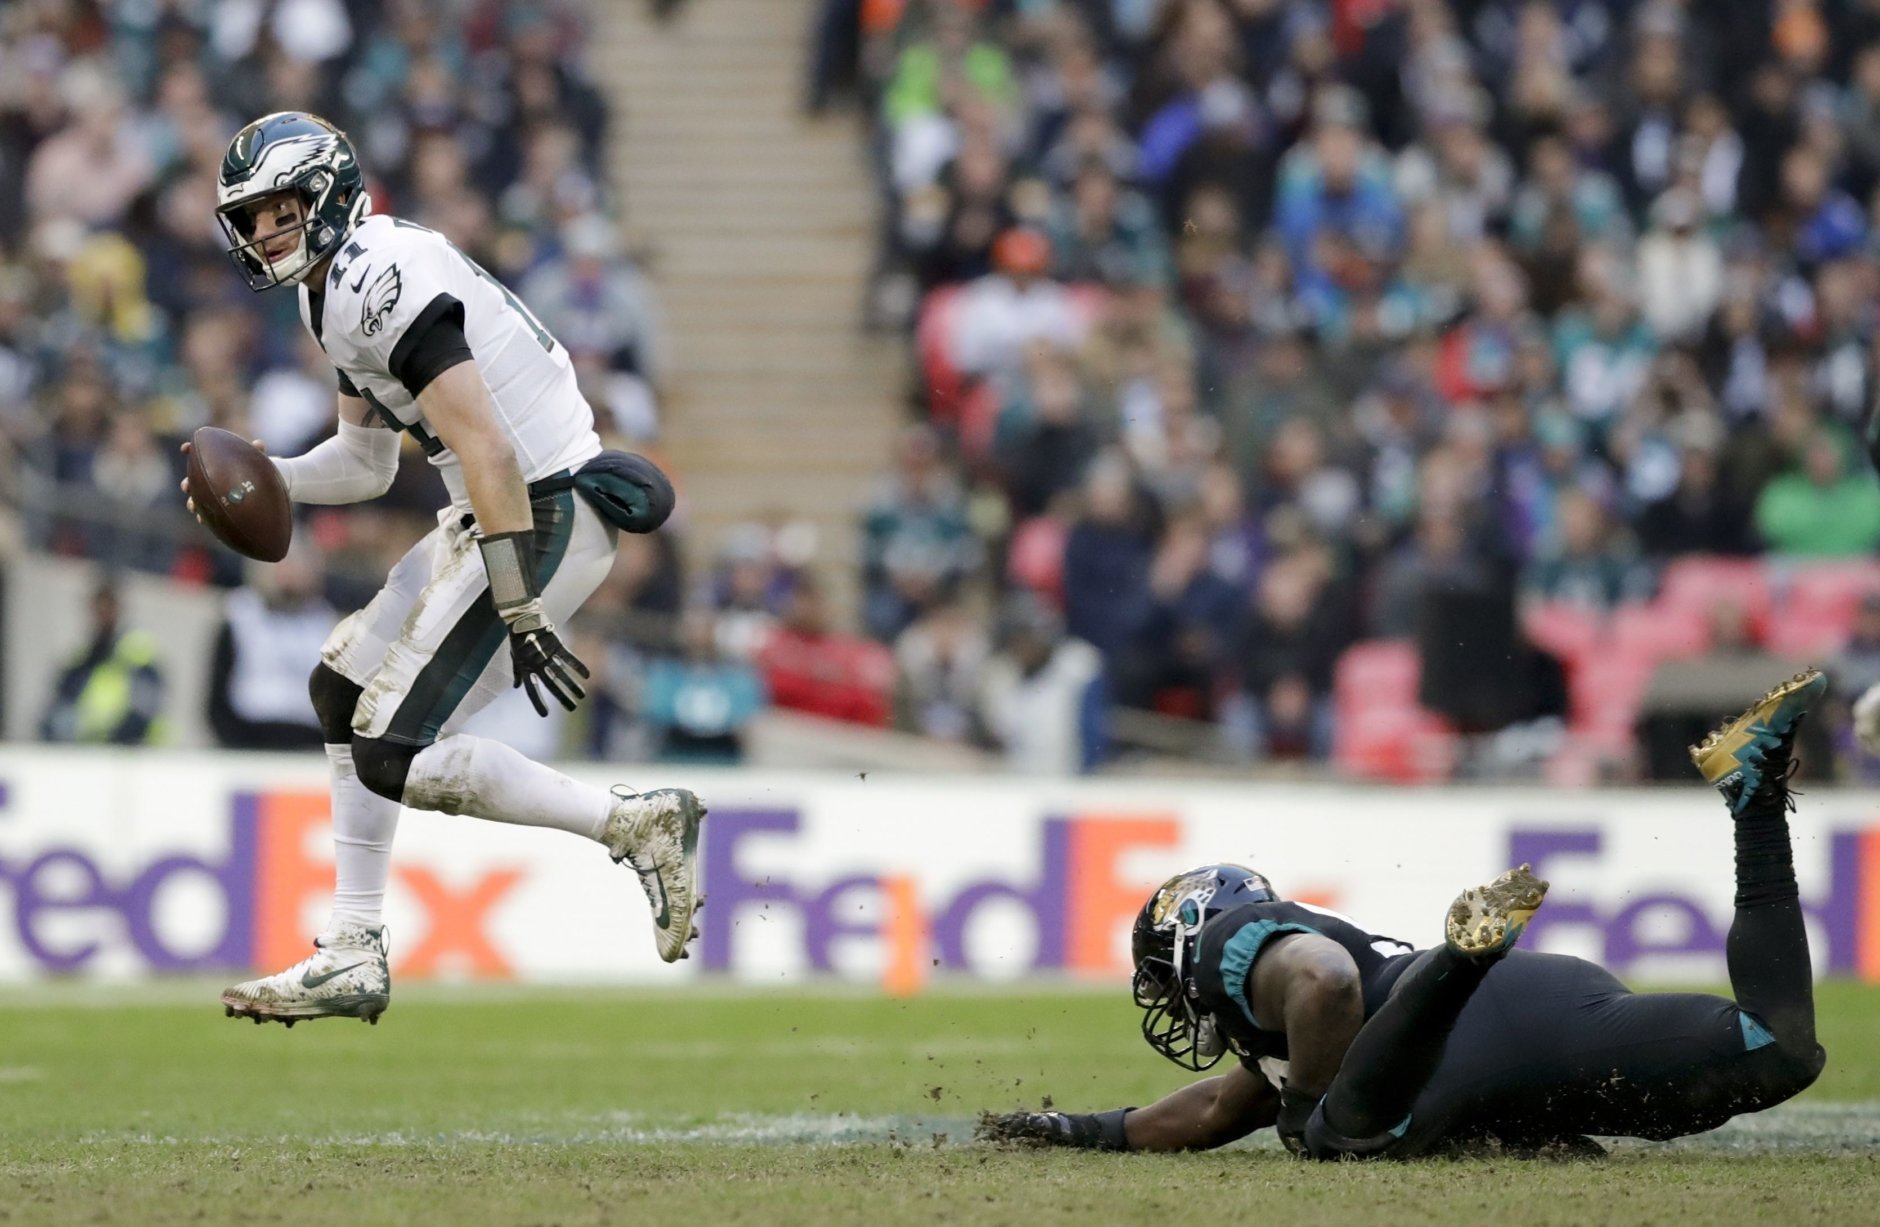 Philadelphia Eagles quarterback Carson Wentz (11), left, skips out of a tackle during the second half of an NFL football game against Jacksonville Jaguars at Wembley stadium in London, Sunday, Oct. 28, 2018. (AP Photo/Matt Dunham)